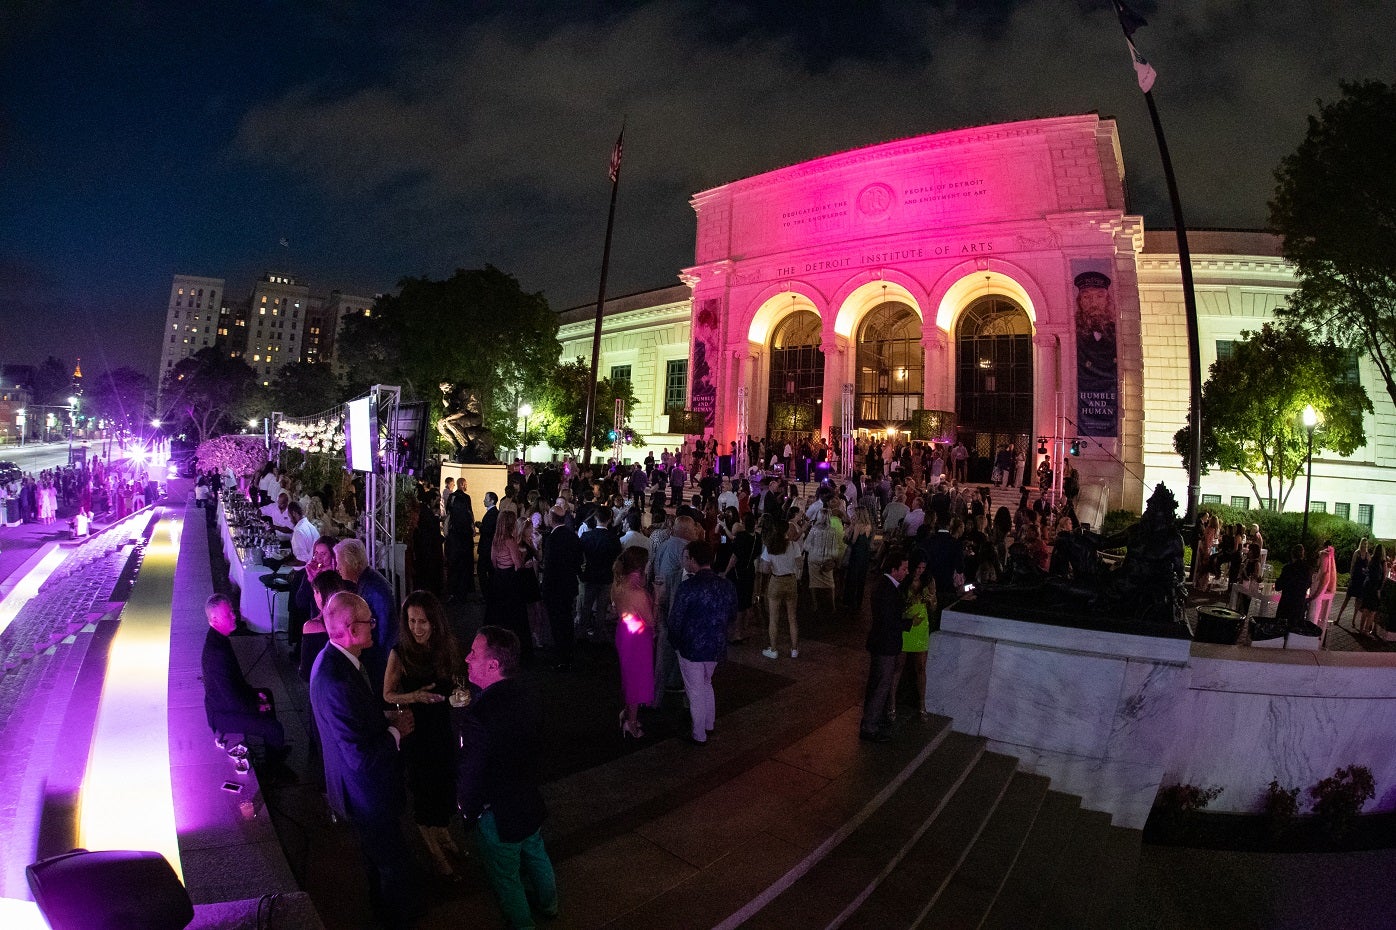 Front facade of the Detroit Institute of Arts light up with purple lights at night during the annual Fash Bash fundraising event.